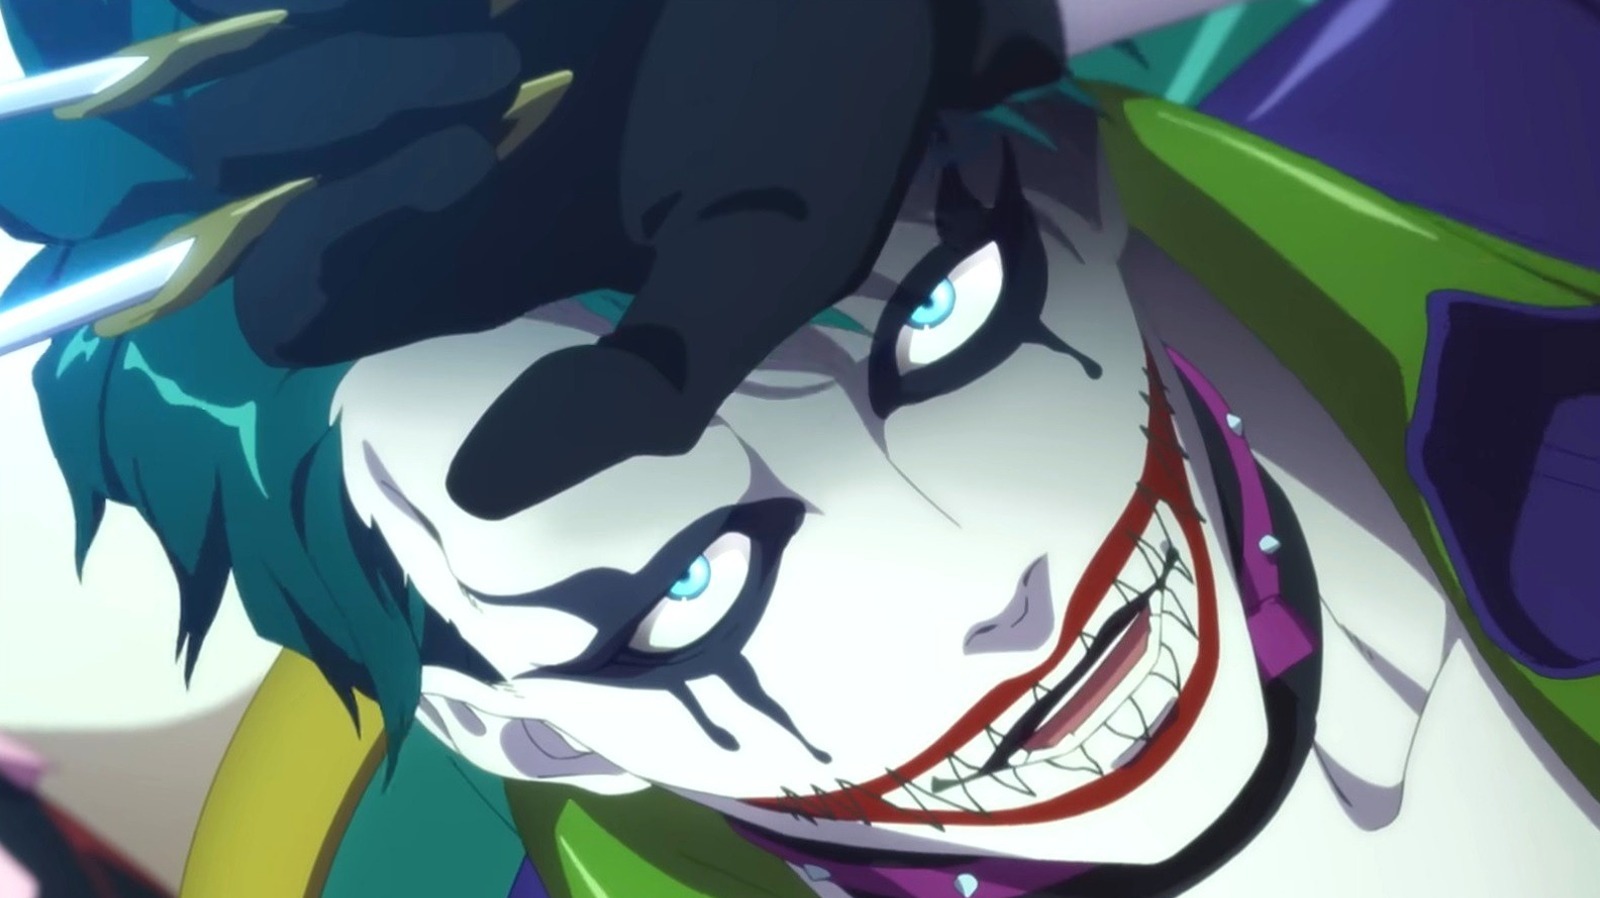 Suicide Squad' Isekai Release Date Window, Cast, Plot, and More